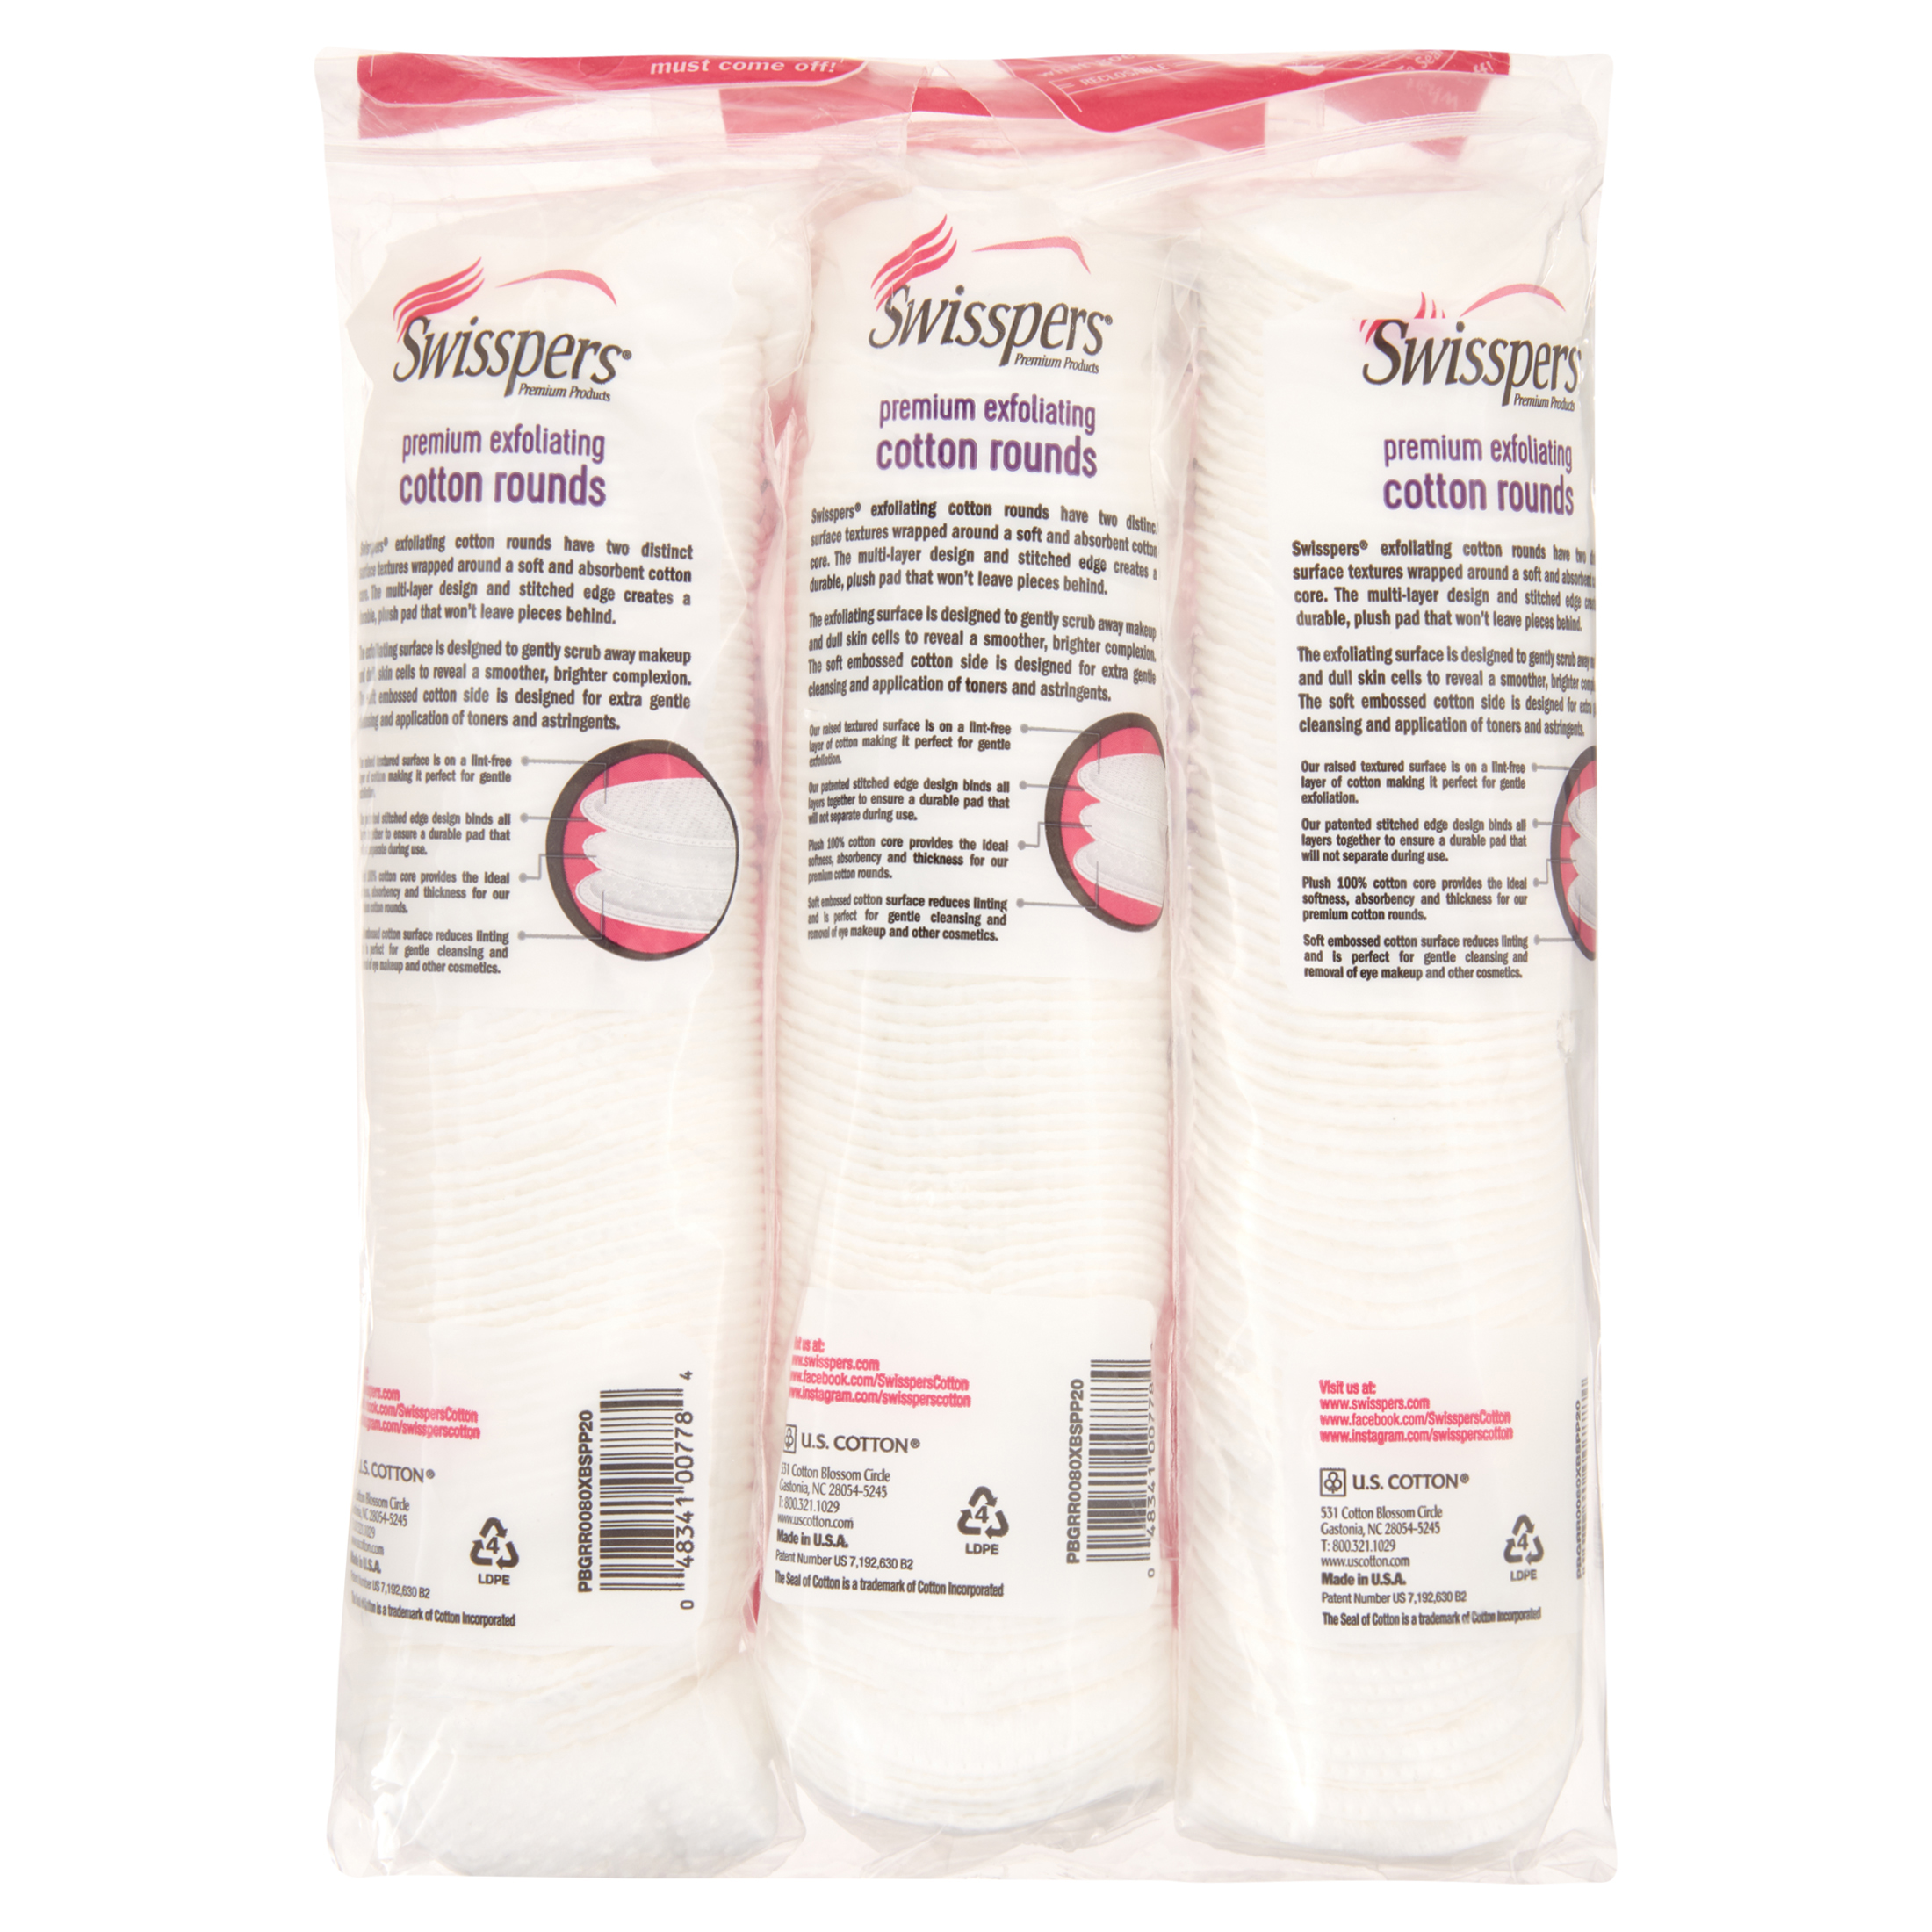 Swisspers Premium Exfoliating Surface White Cotton Rounds 80 Count ...